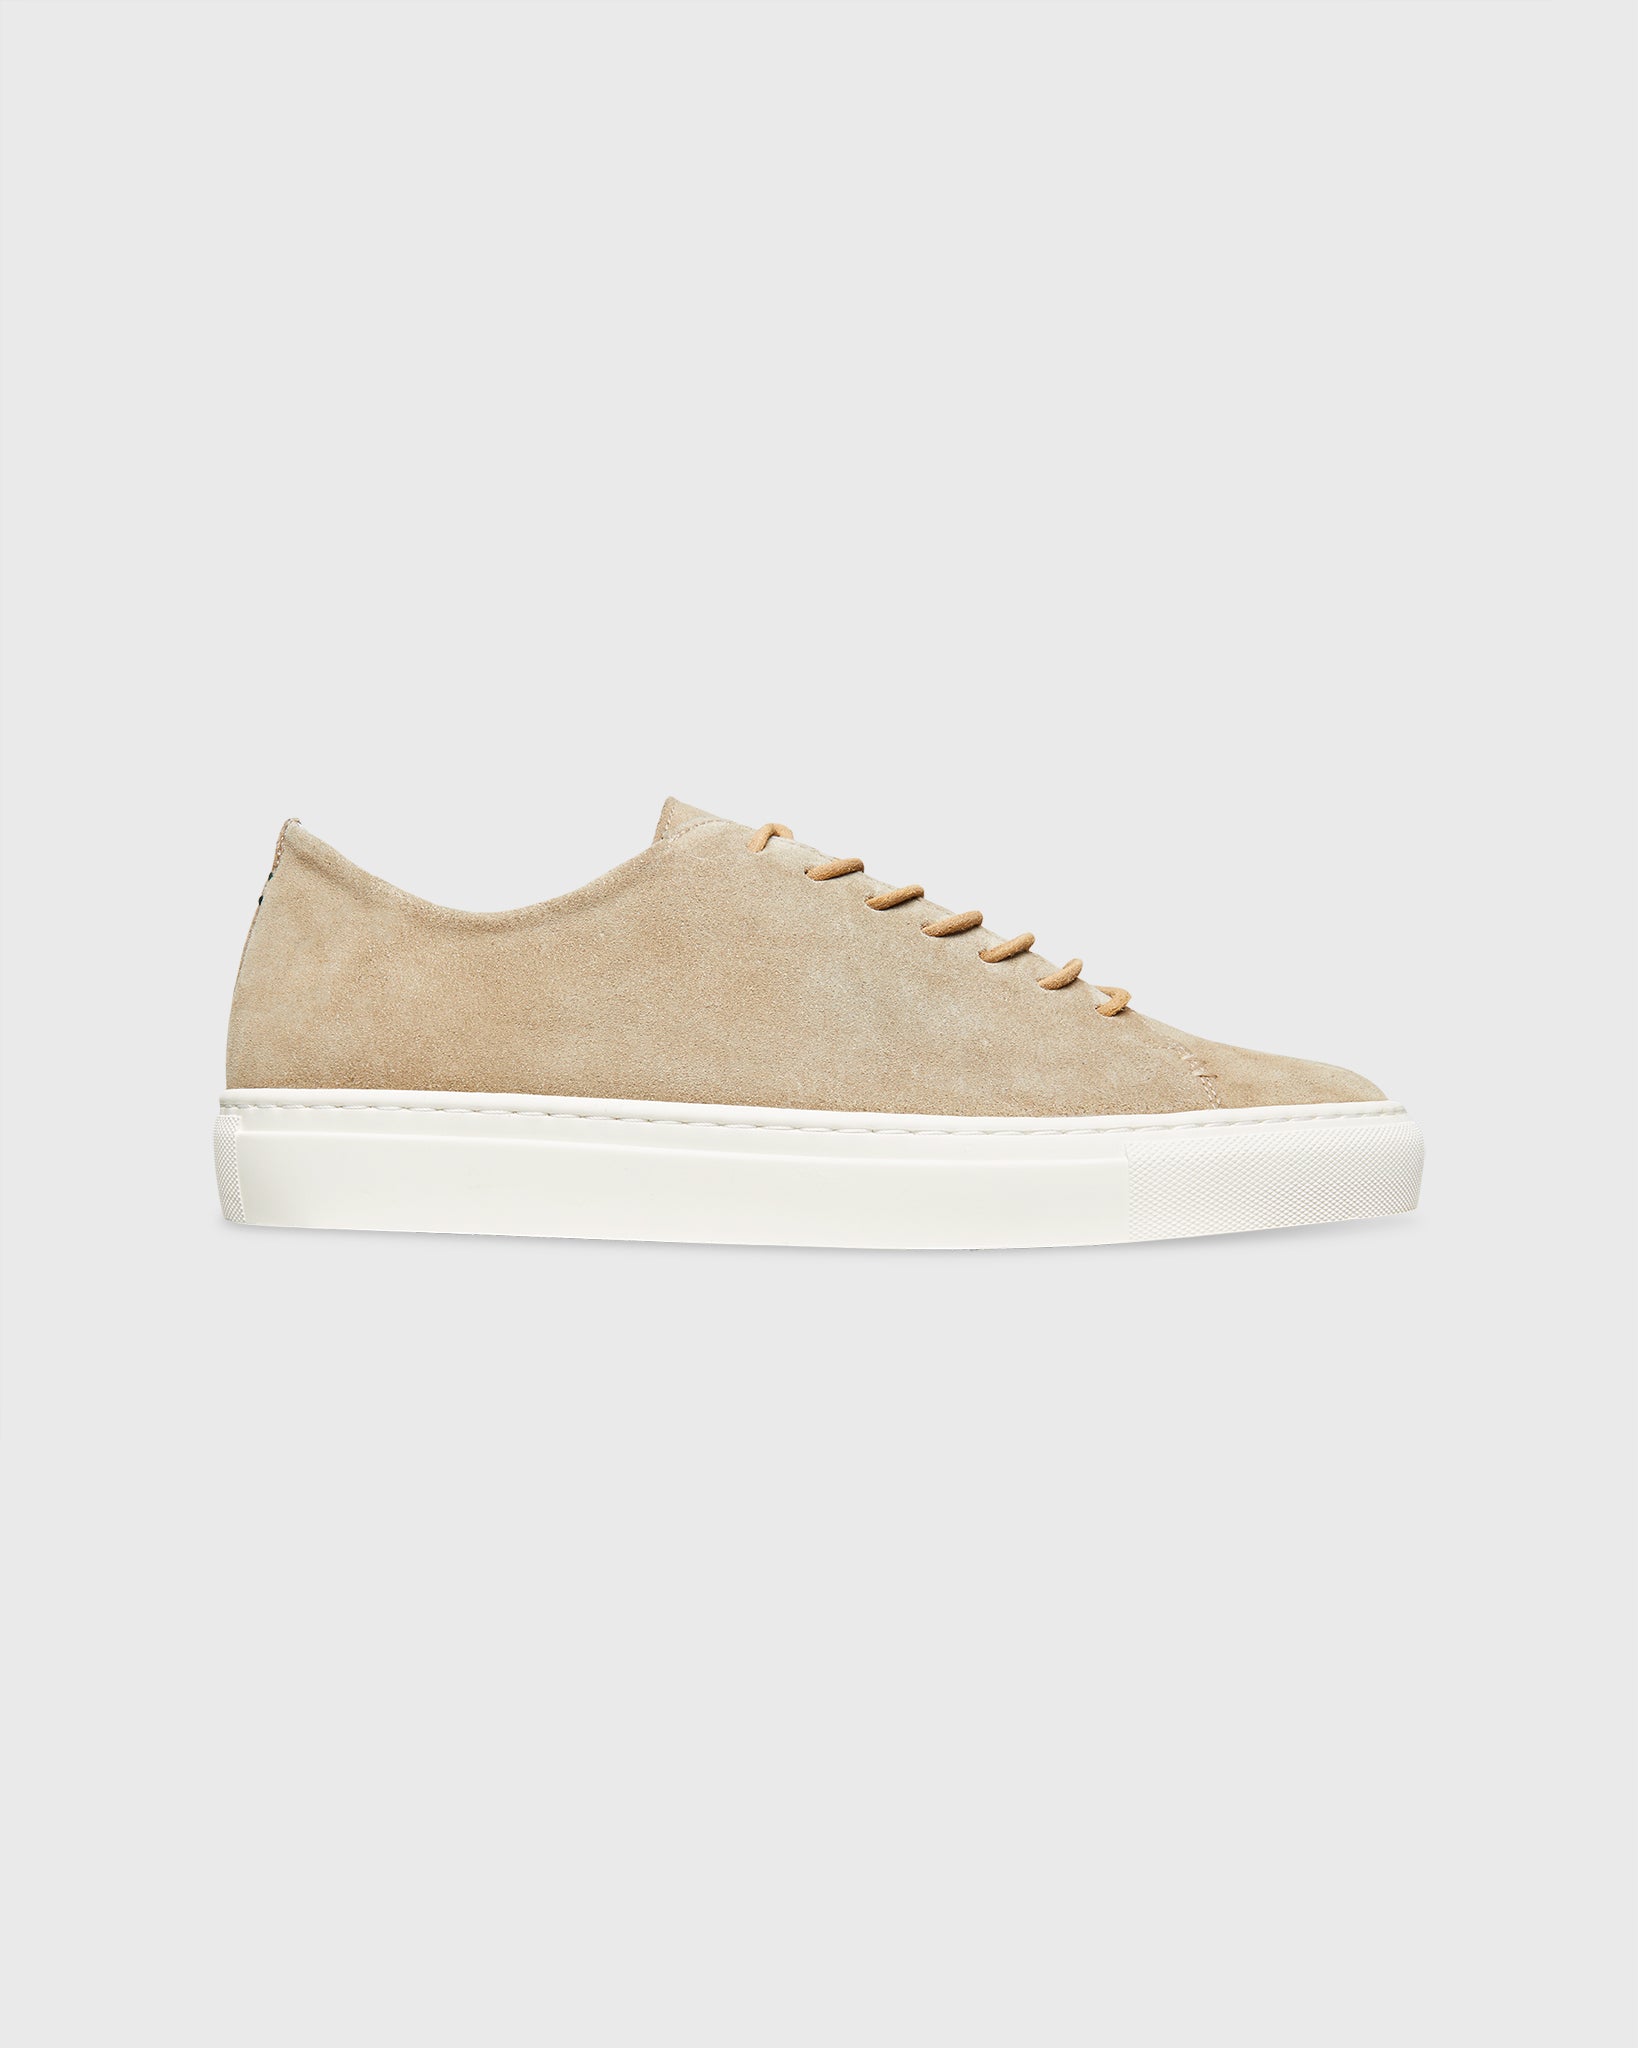 Low-Top Lace-Up Sneaker in Stone Suede